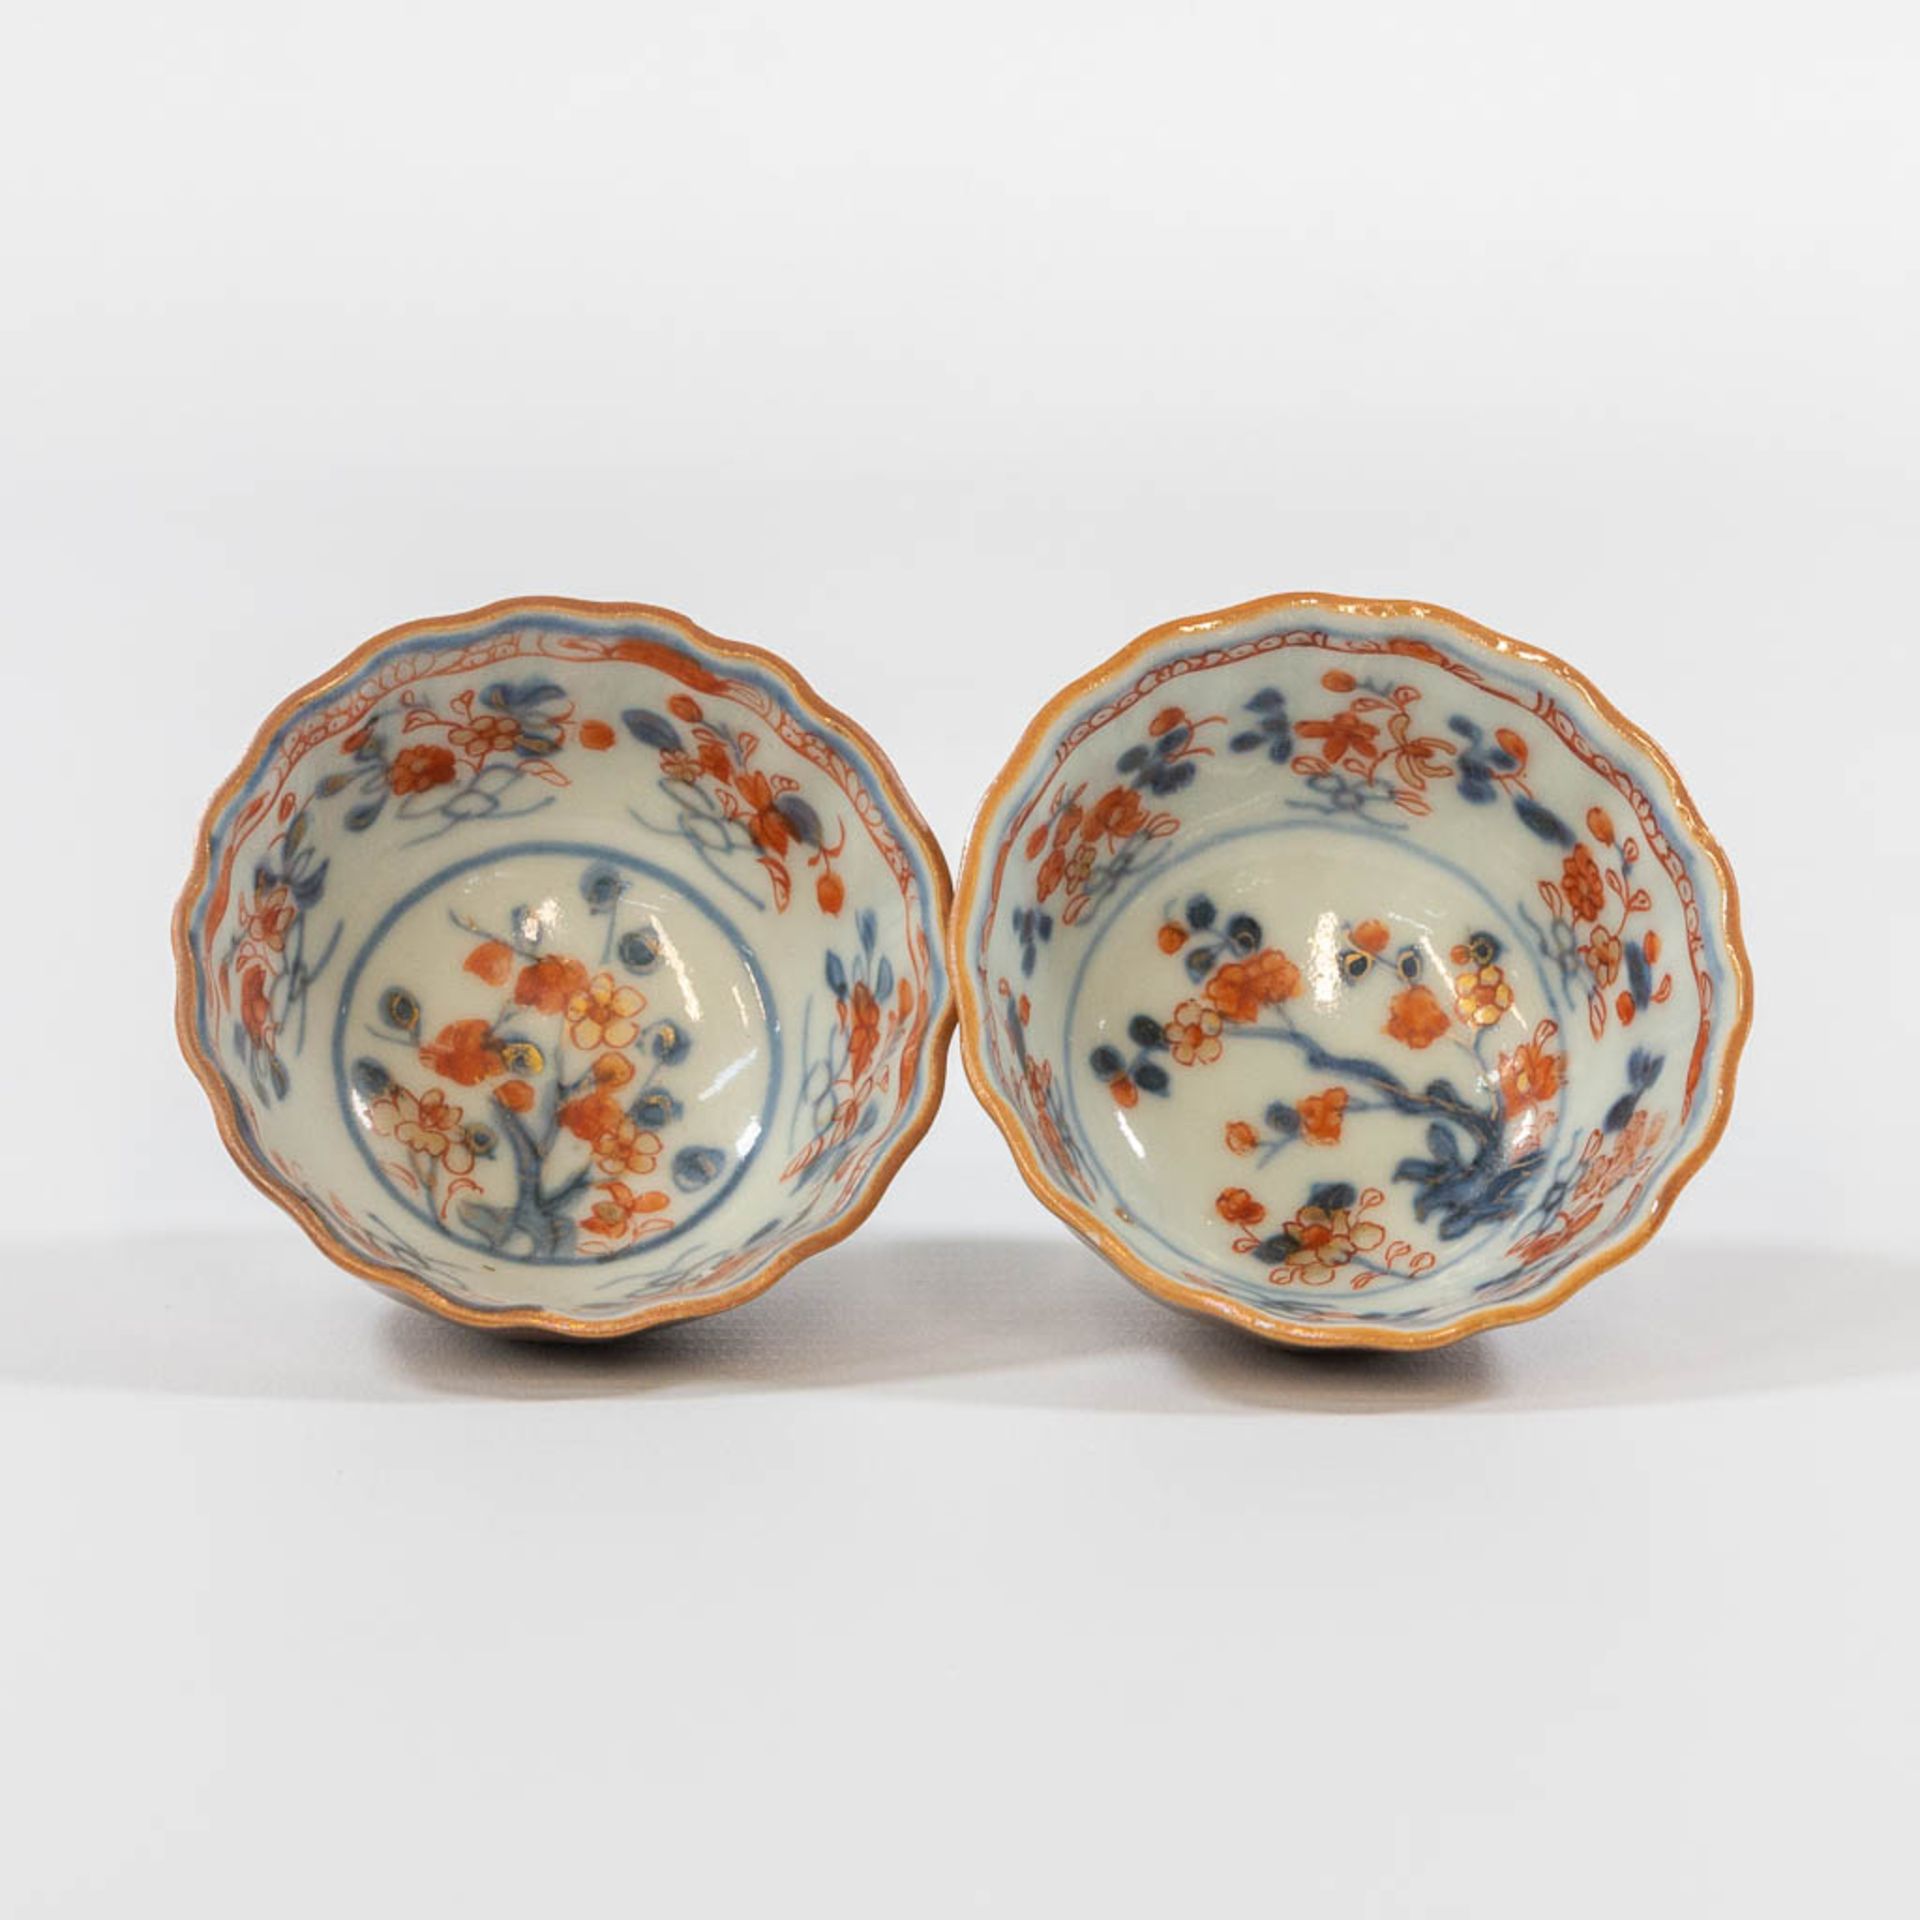 A collection of 12 Capucine Chinese porcelain items, consisting of 5 plates and 7 cups. - Image 19 of 26